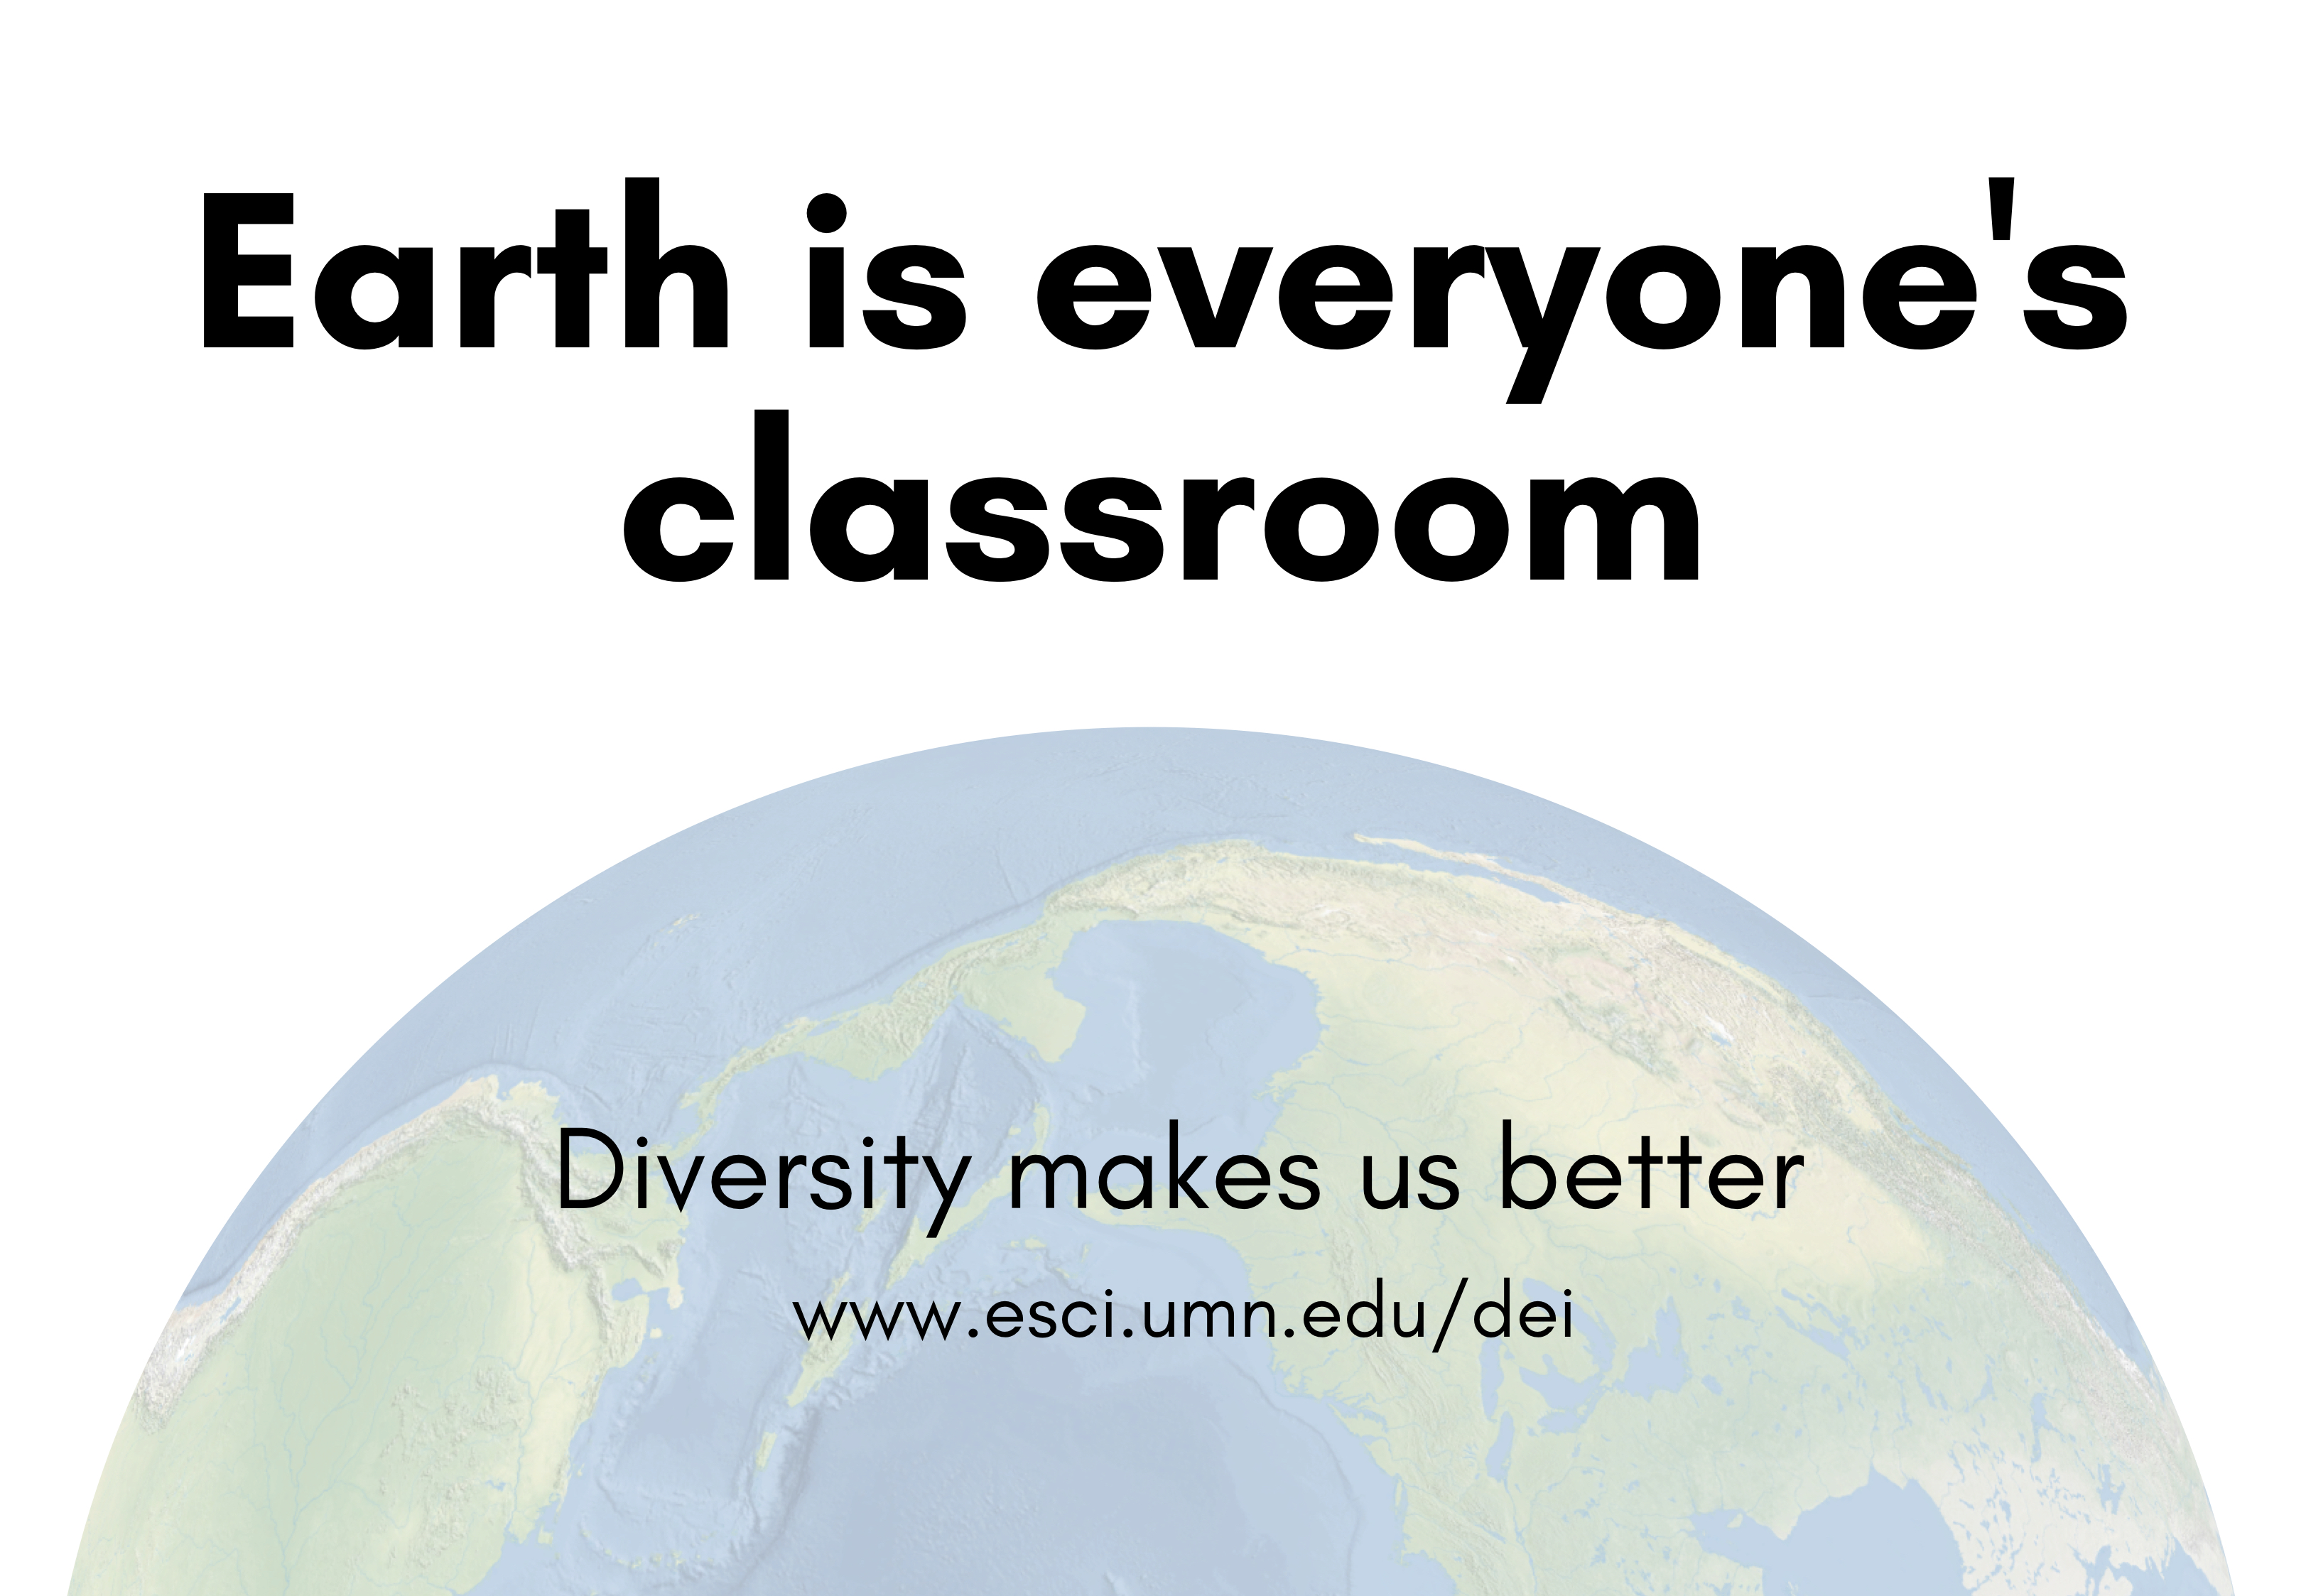 Earth is everyone's classroom, sticker by Riley Schmitter and Andrew Wickert